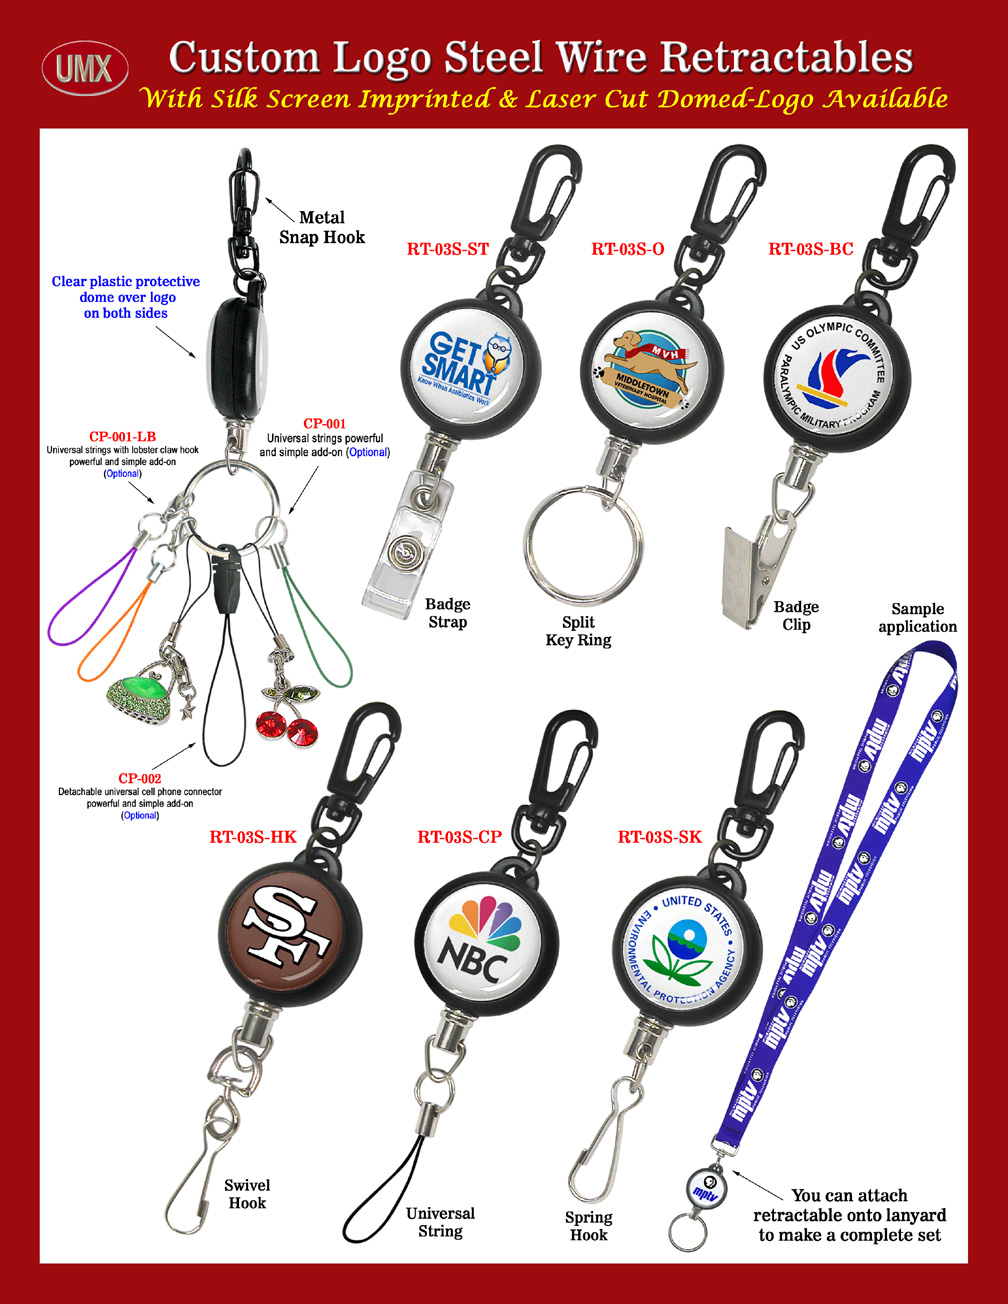 Custom Printed Retractable Name Badge Holders With Protected Domed Covers.